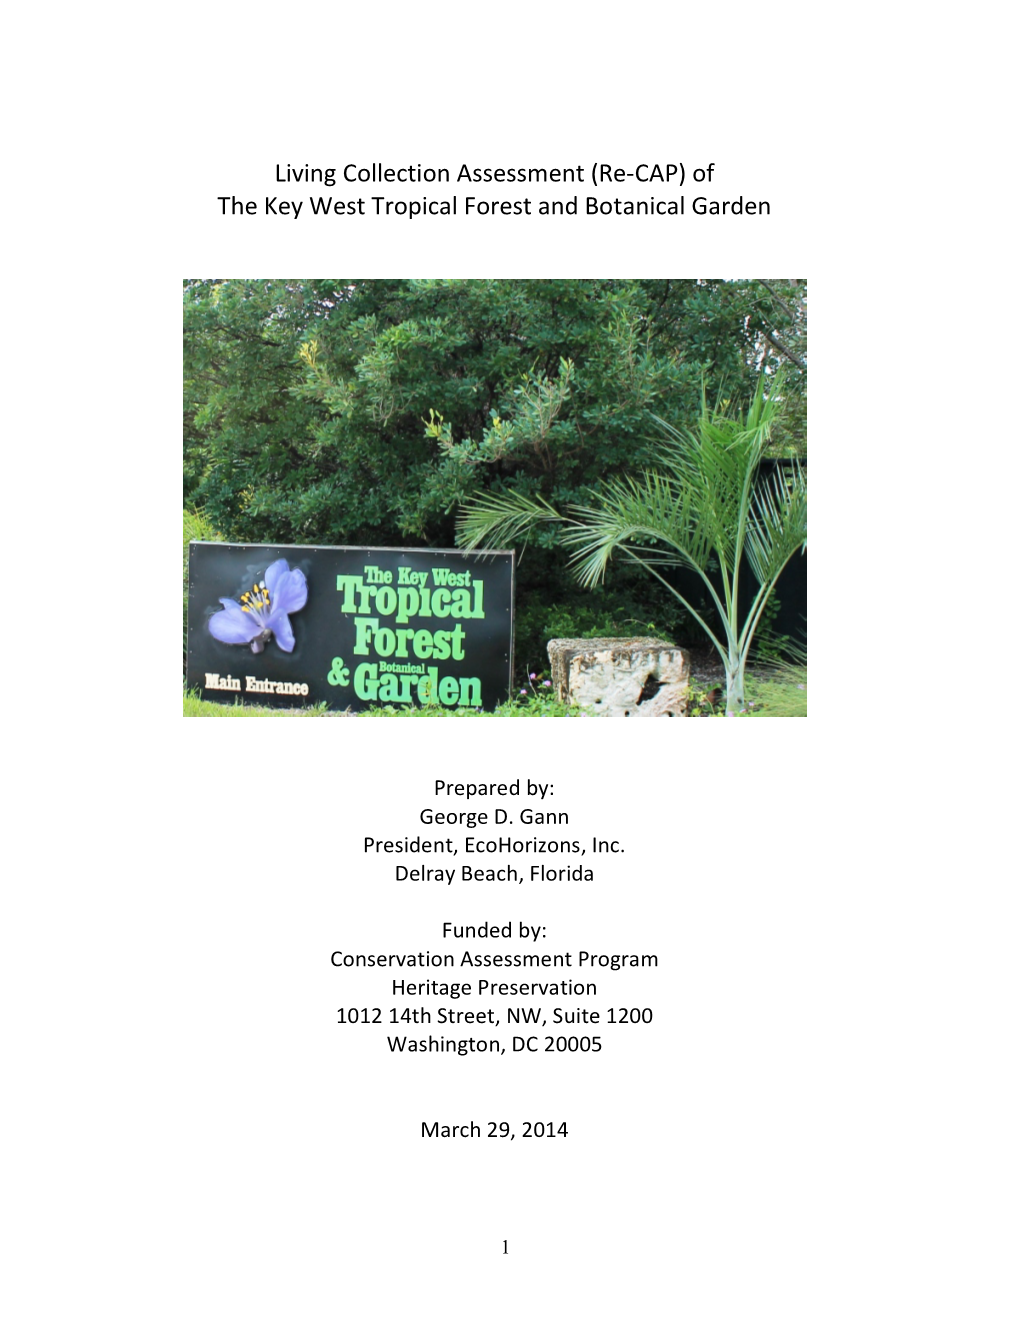 Living Collection Assessment (Re-CAP) of the Key West Tropical Forest and Botanical Garden